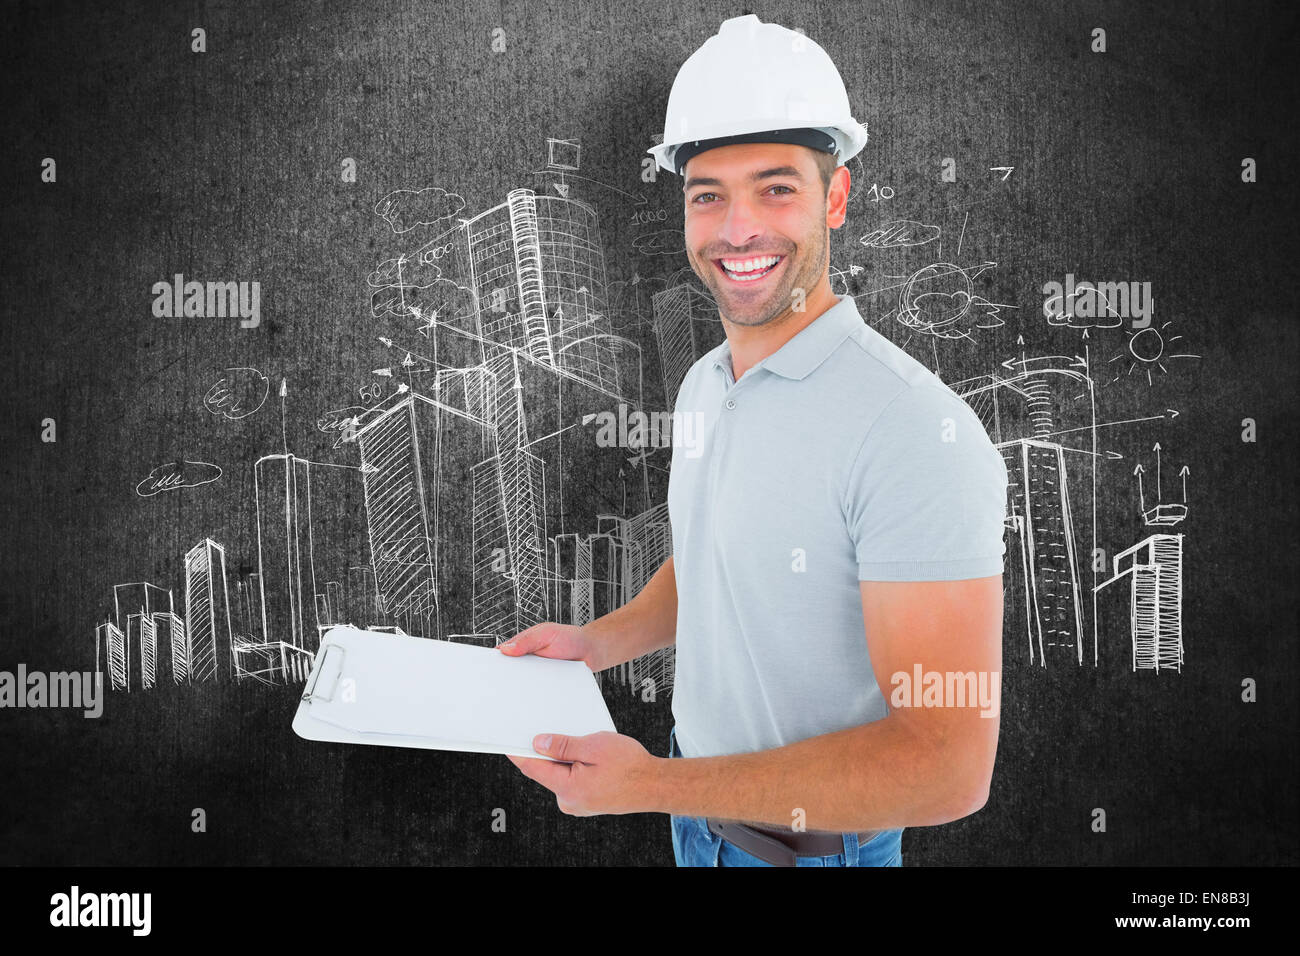 Composite image of portrait of manual worker holding clipboard Stock Photo